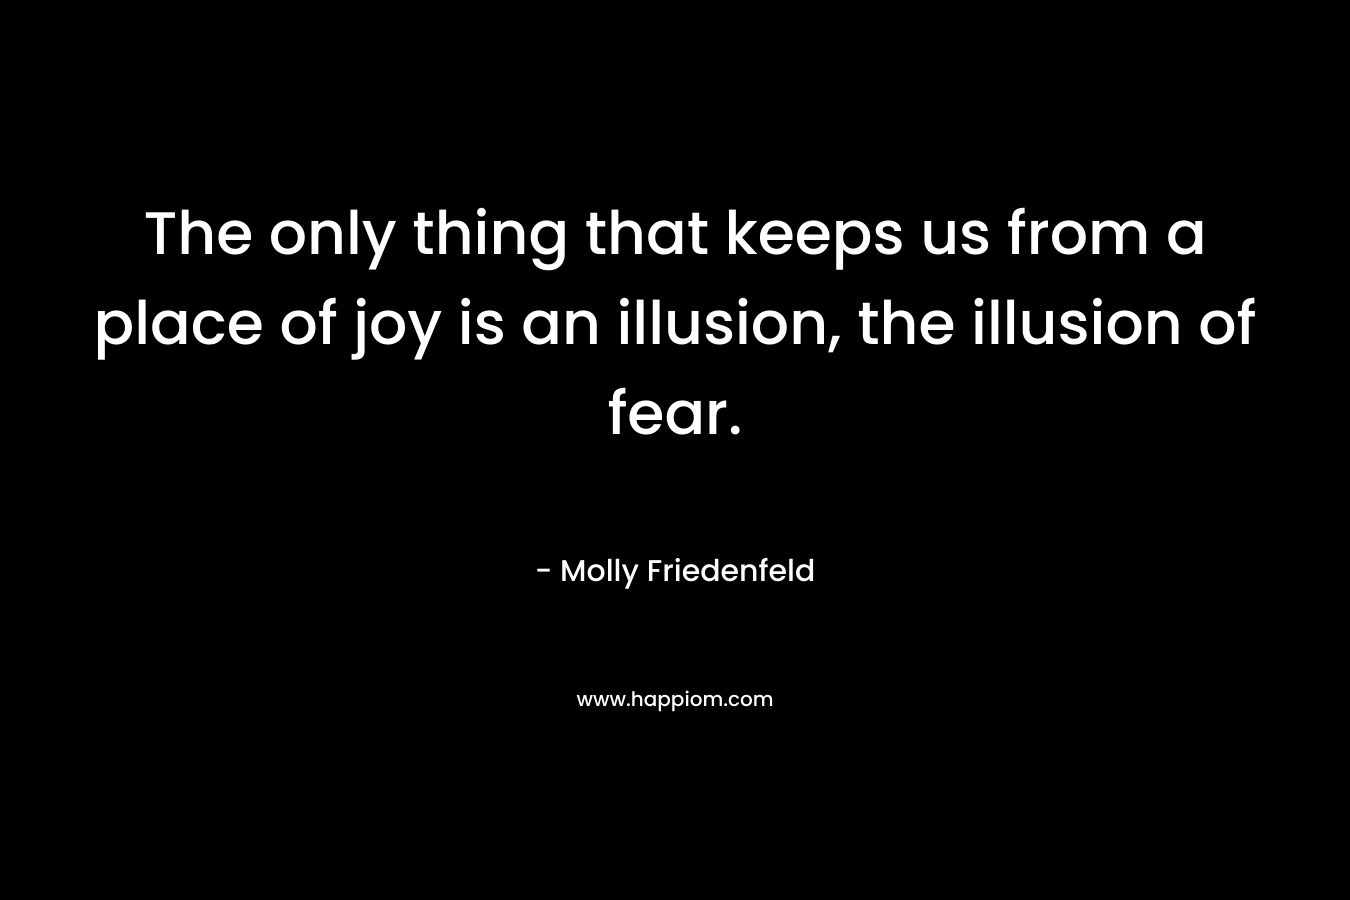 The only thing that keeps us from a place of joy is an illusion, the illusion of fear.